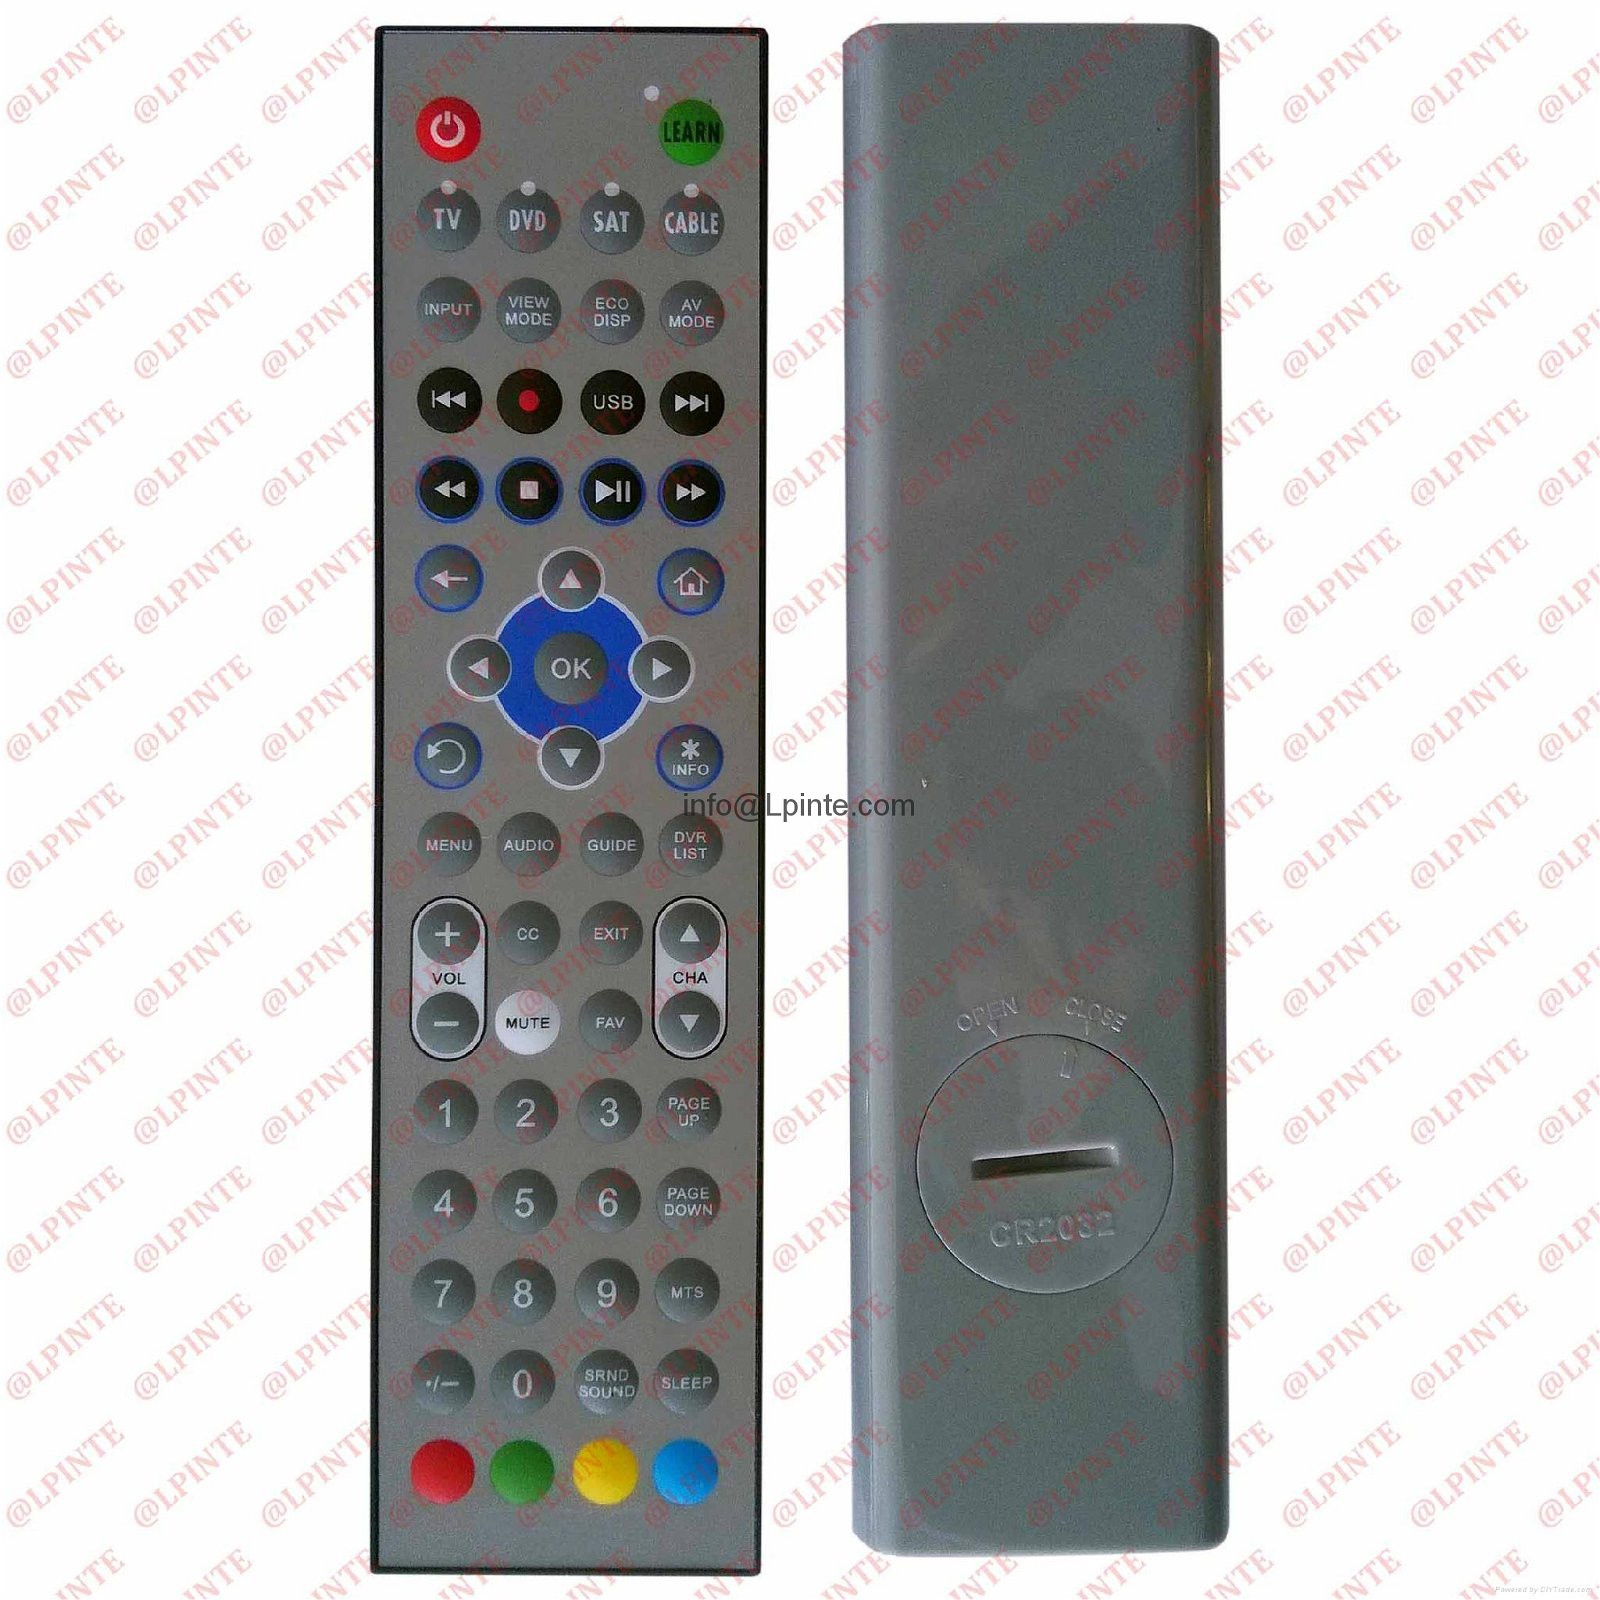 waterproof tv remote control for hotel hospital home